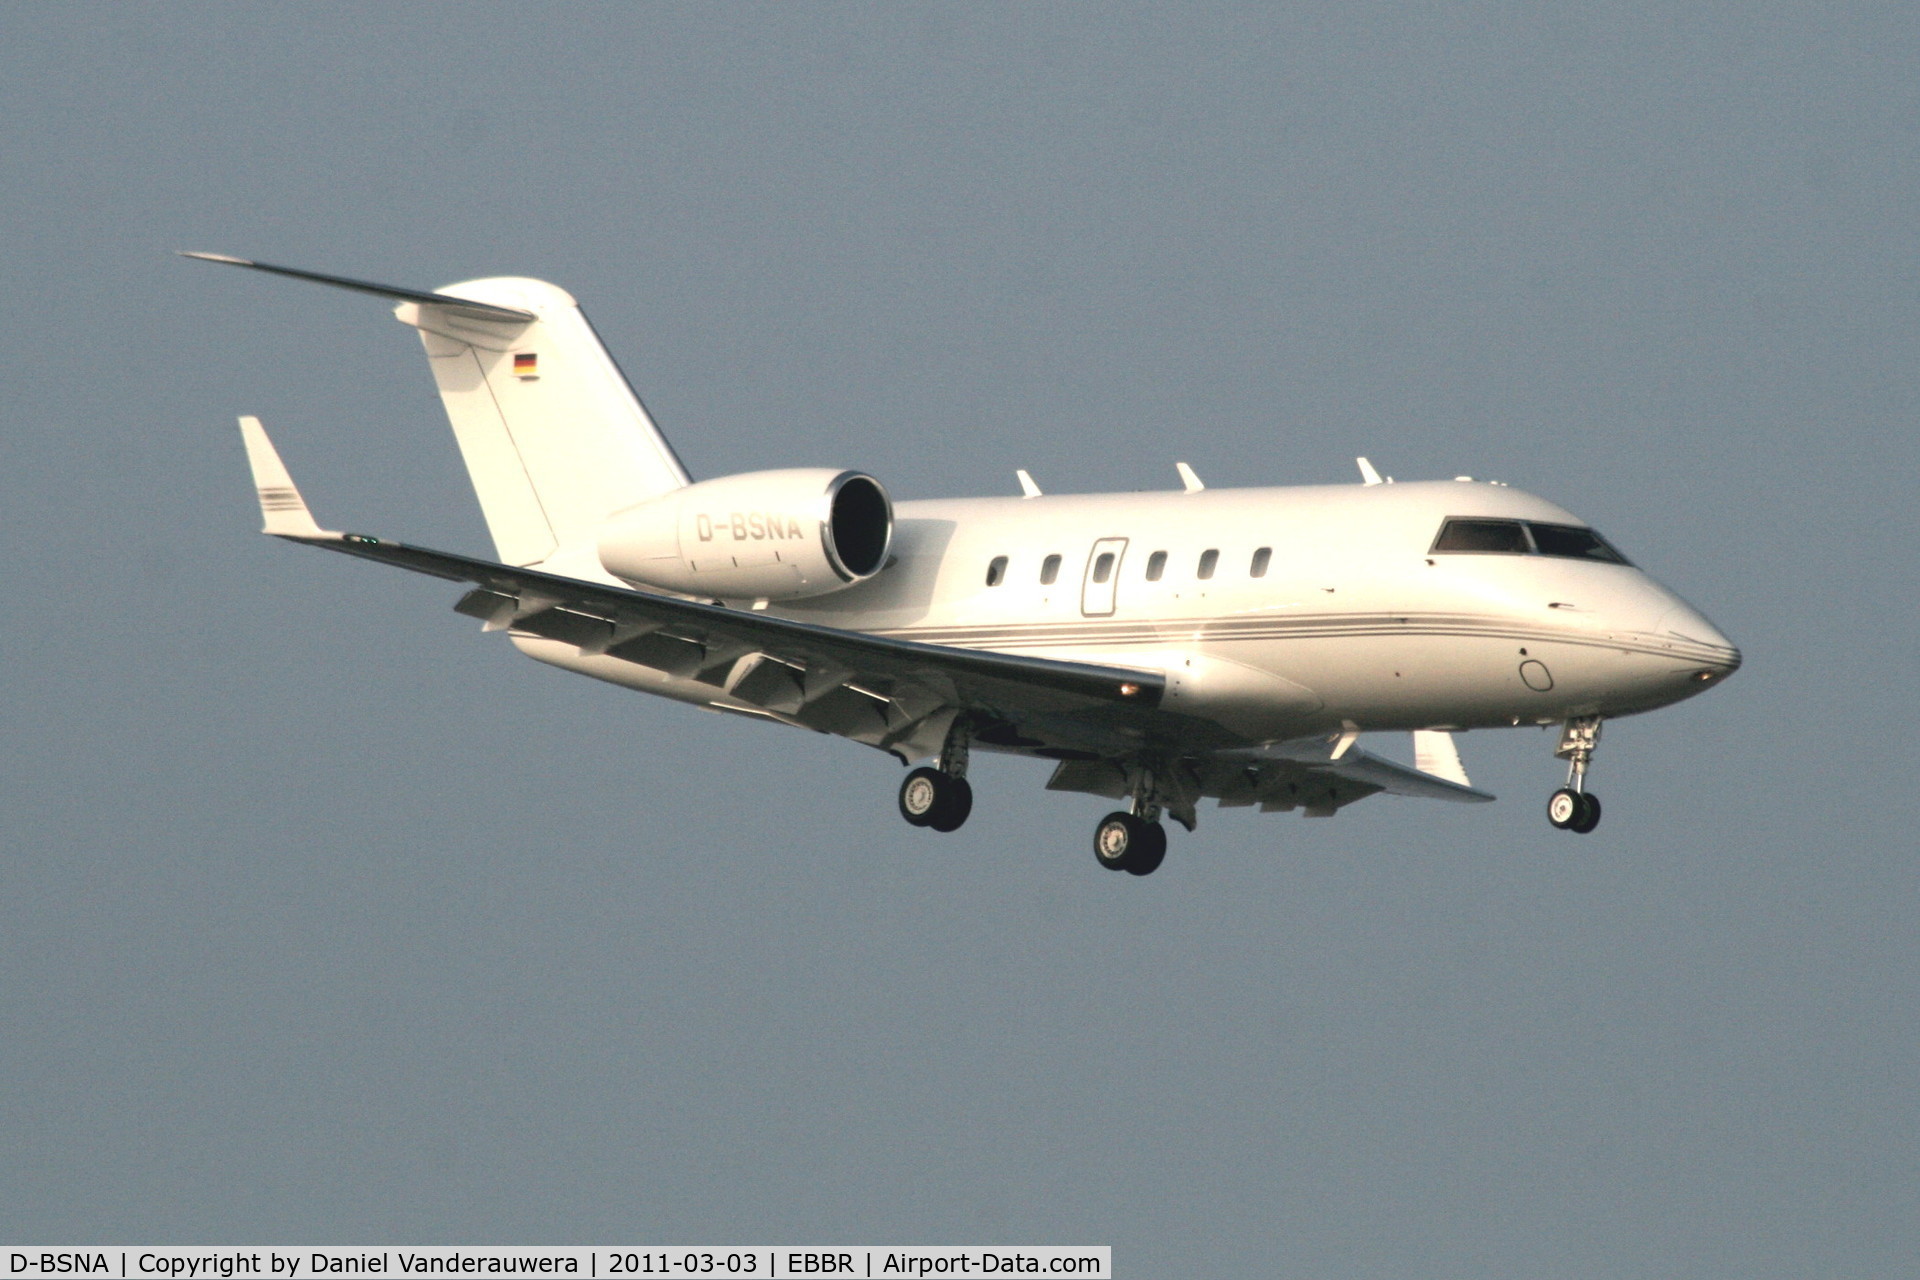 D-BSNA, 1982 Canadair Challenger 600 (CL-600-1A11) C/N 1066, Arrival to RWY 02